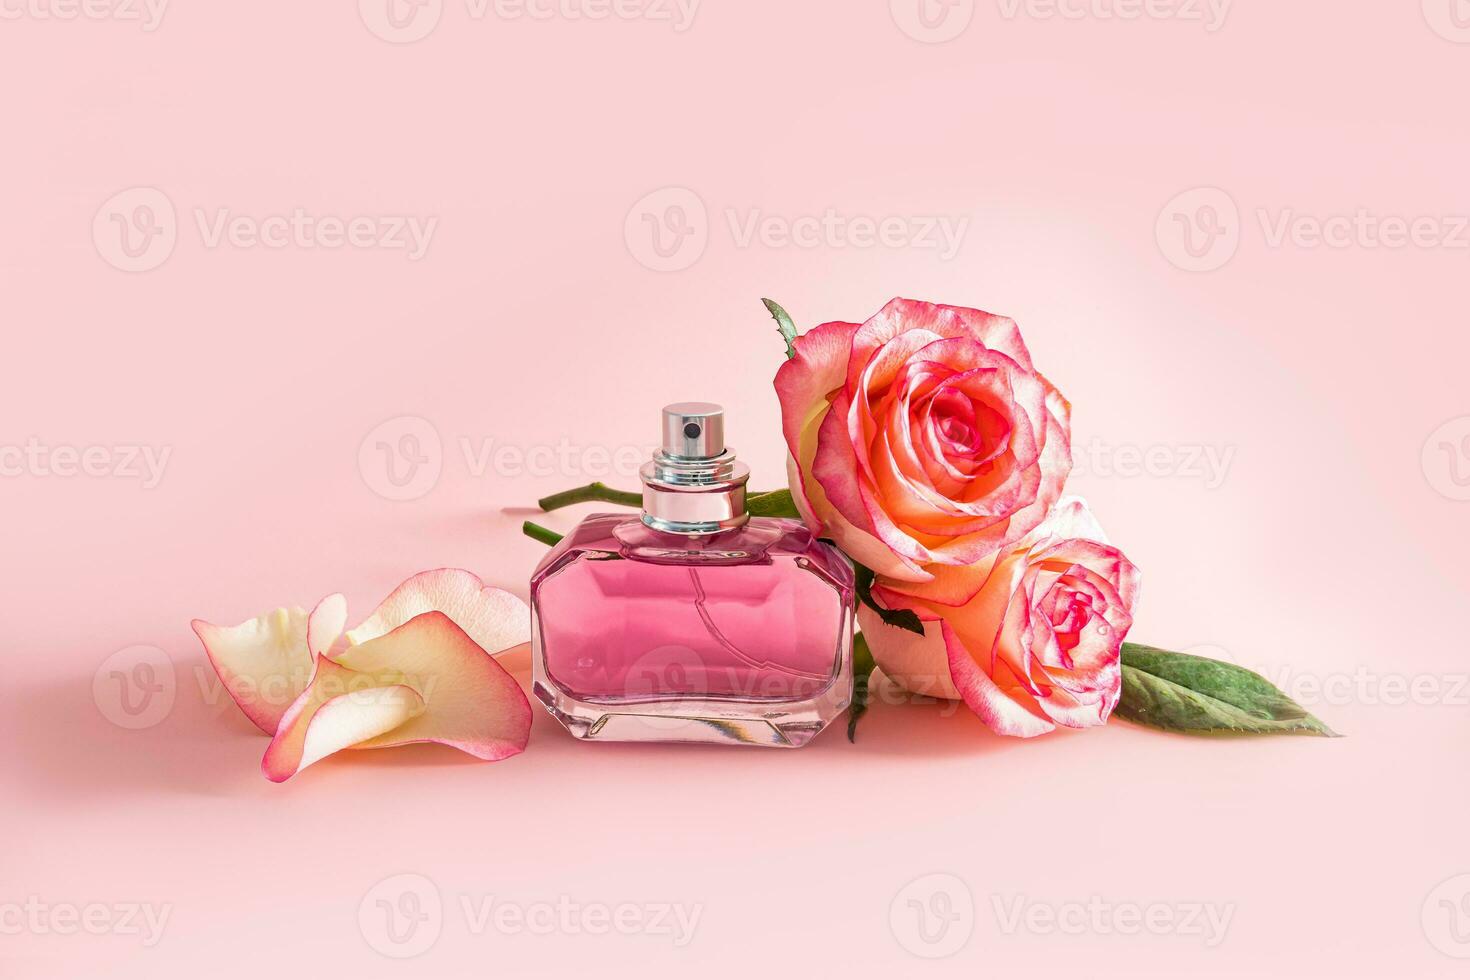 Crystal bottle with women's parfum or spray on a pink background with rose petals and flowers. Presentation of the fragrance. Blank bottle layout. photo